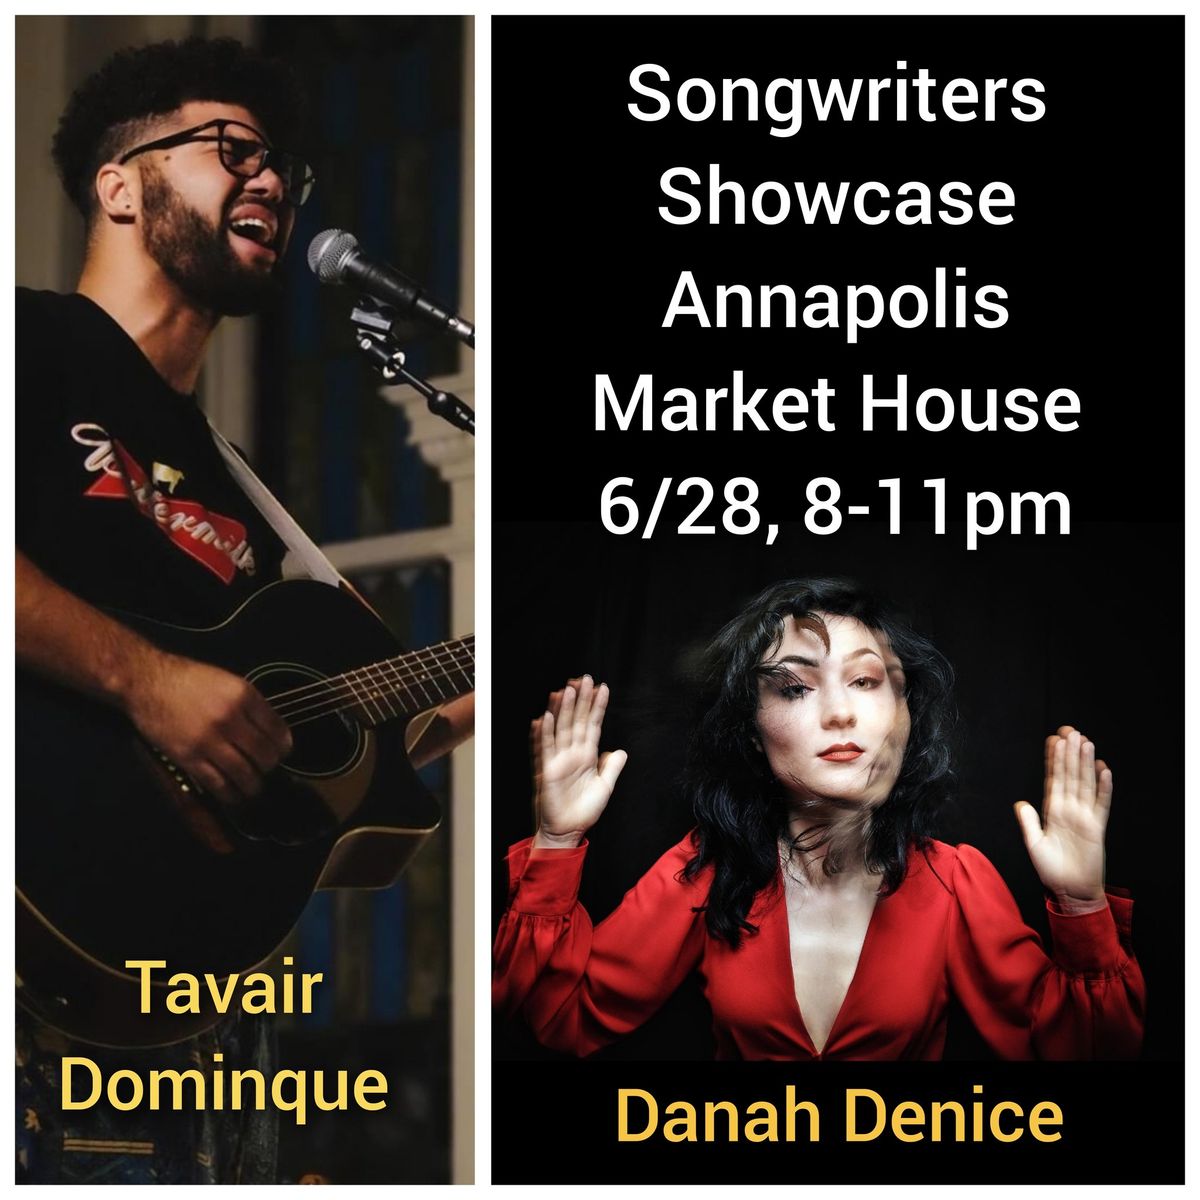 Local Songwriters Showcase @ Annapolis Market House